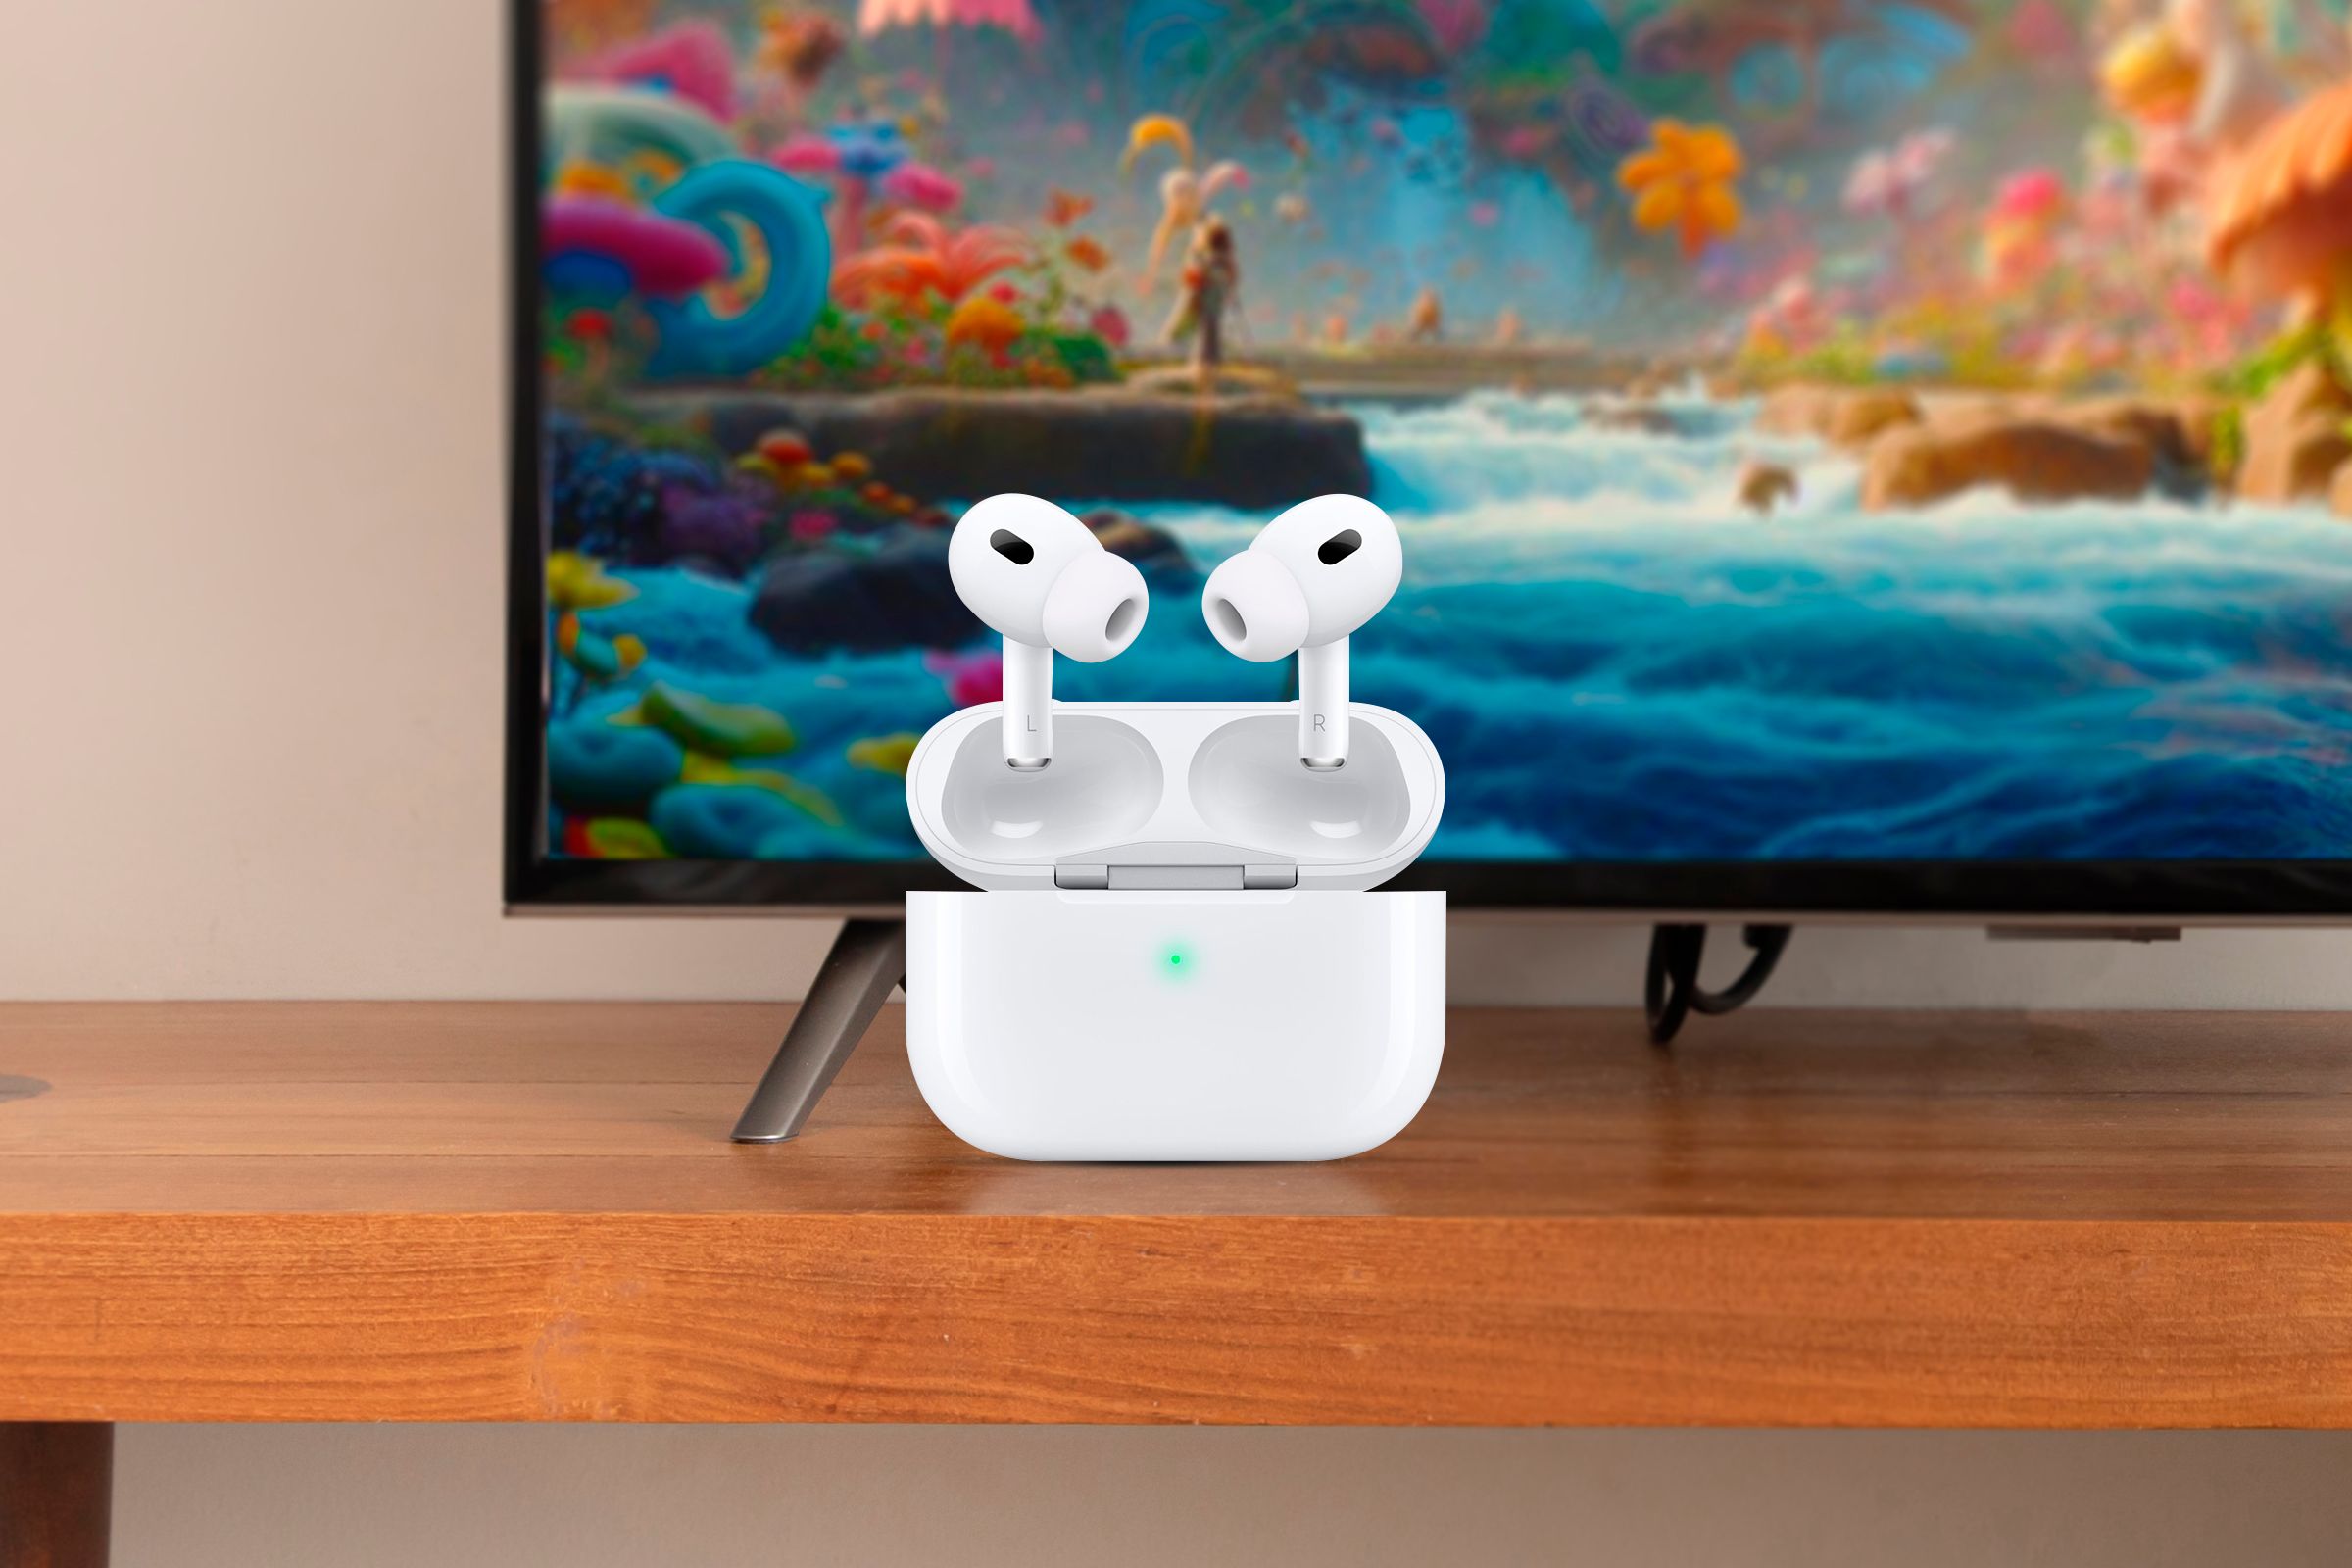 A pair of AirPods above a shelf with a TV in the background.